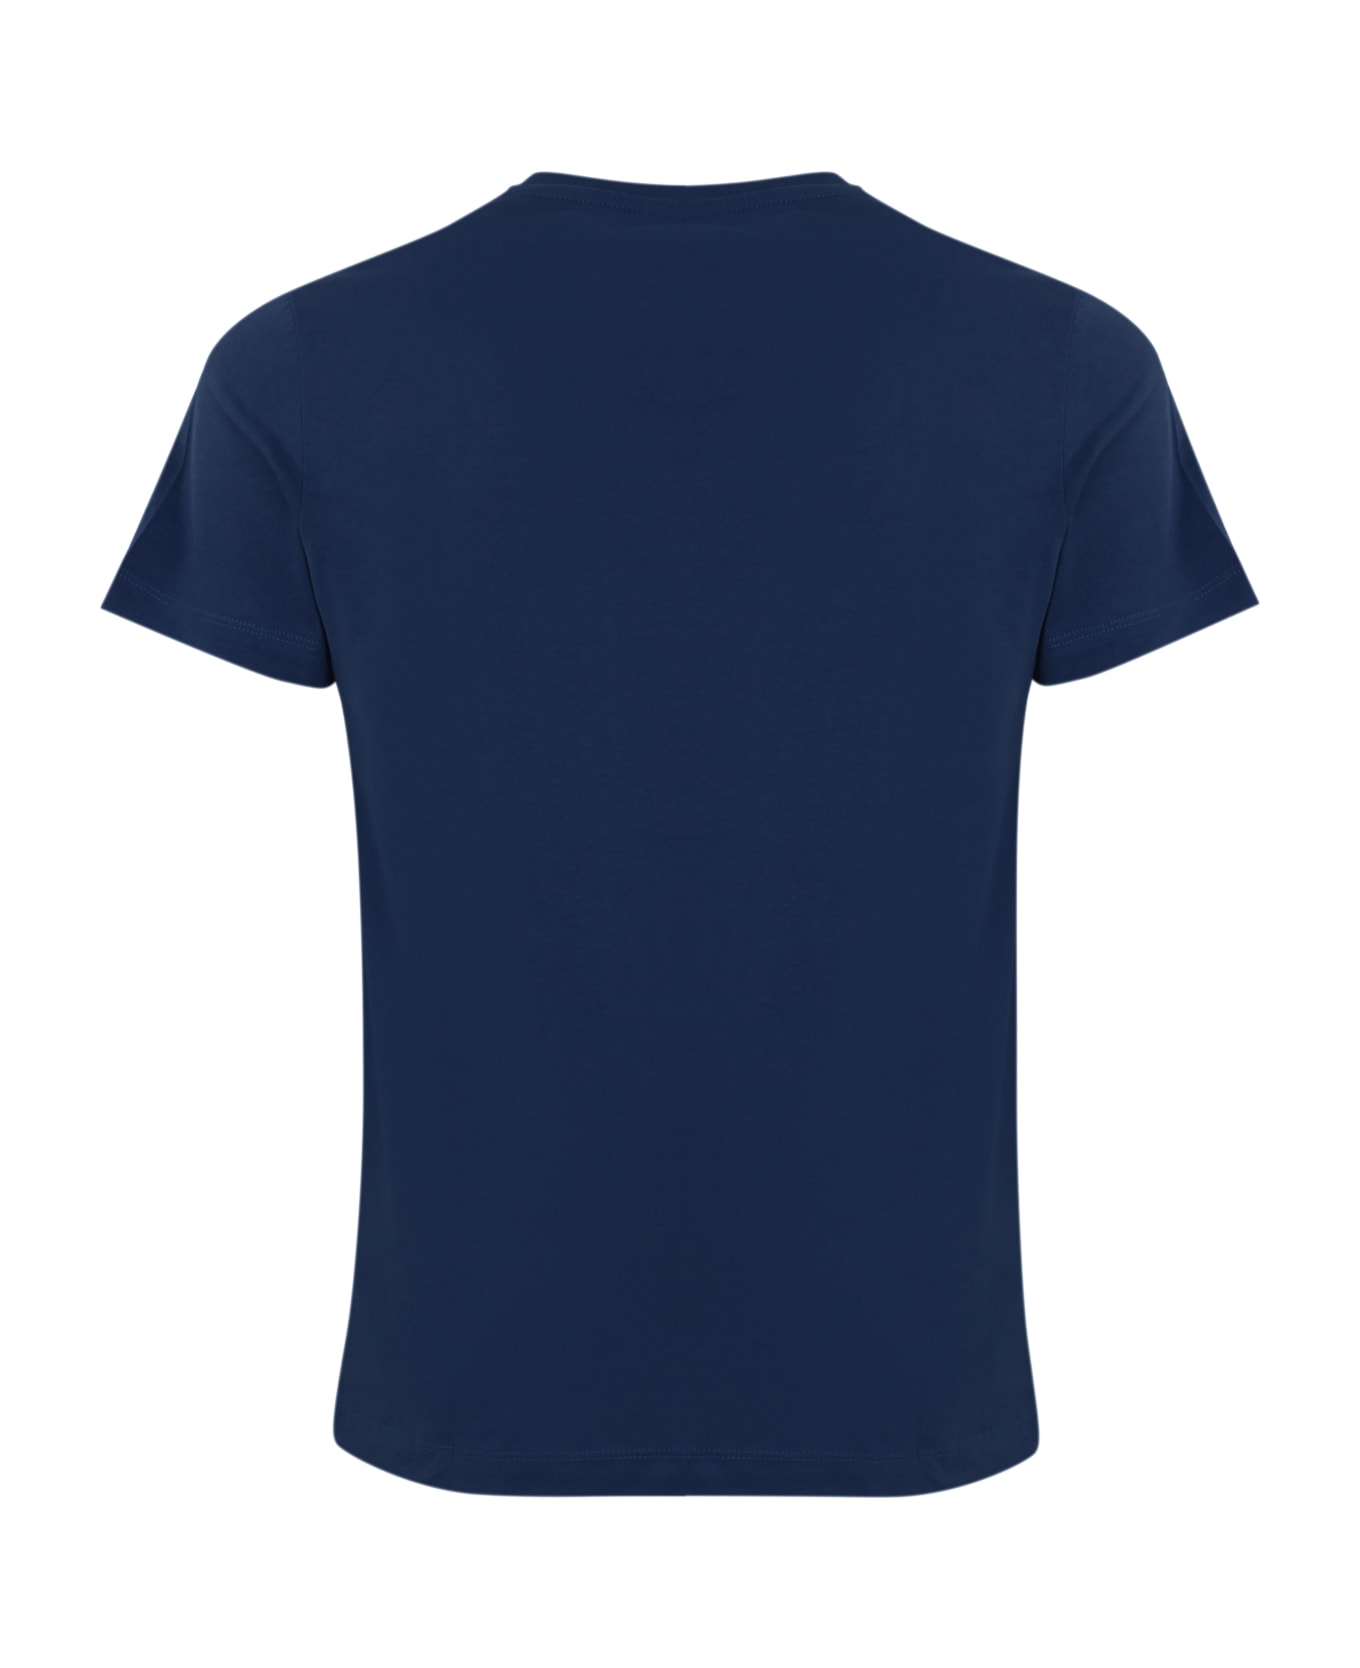 Roy Rogers Cotton T-shirt With Logo - Blue navy シャツ